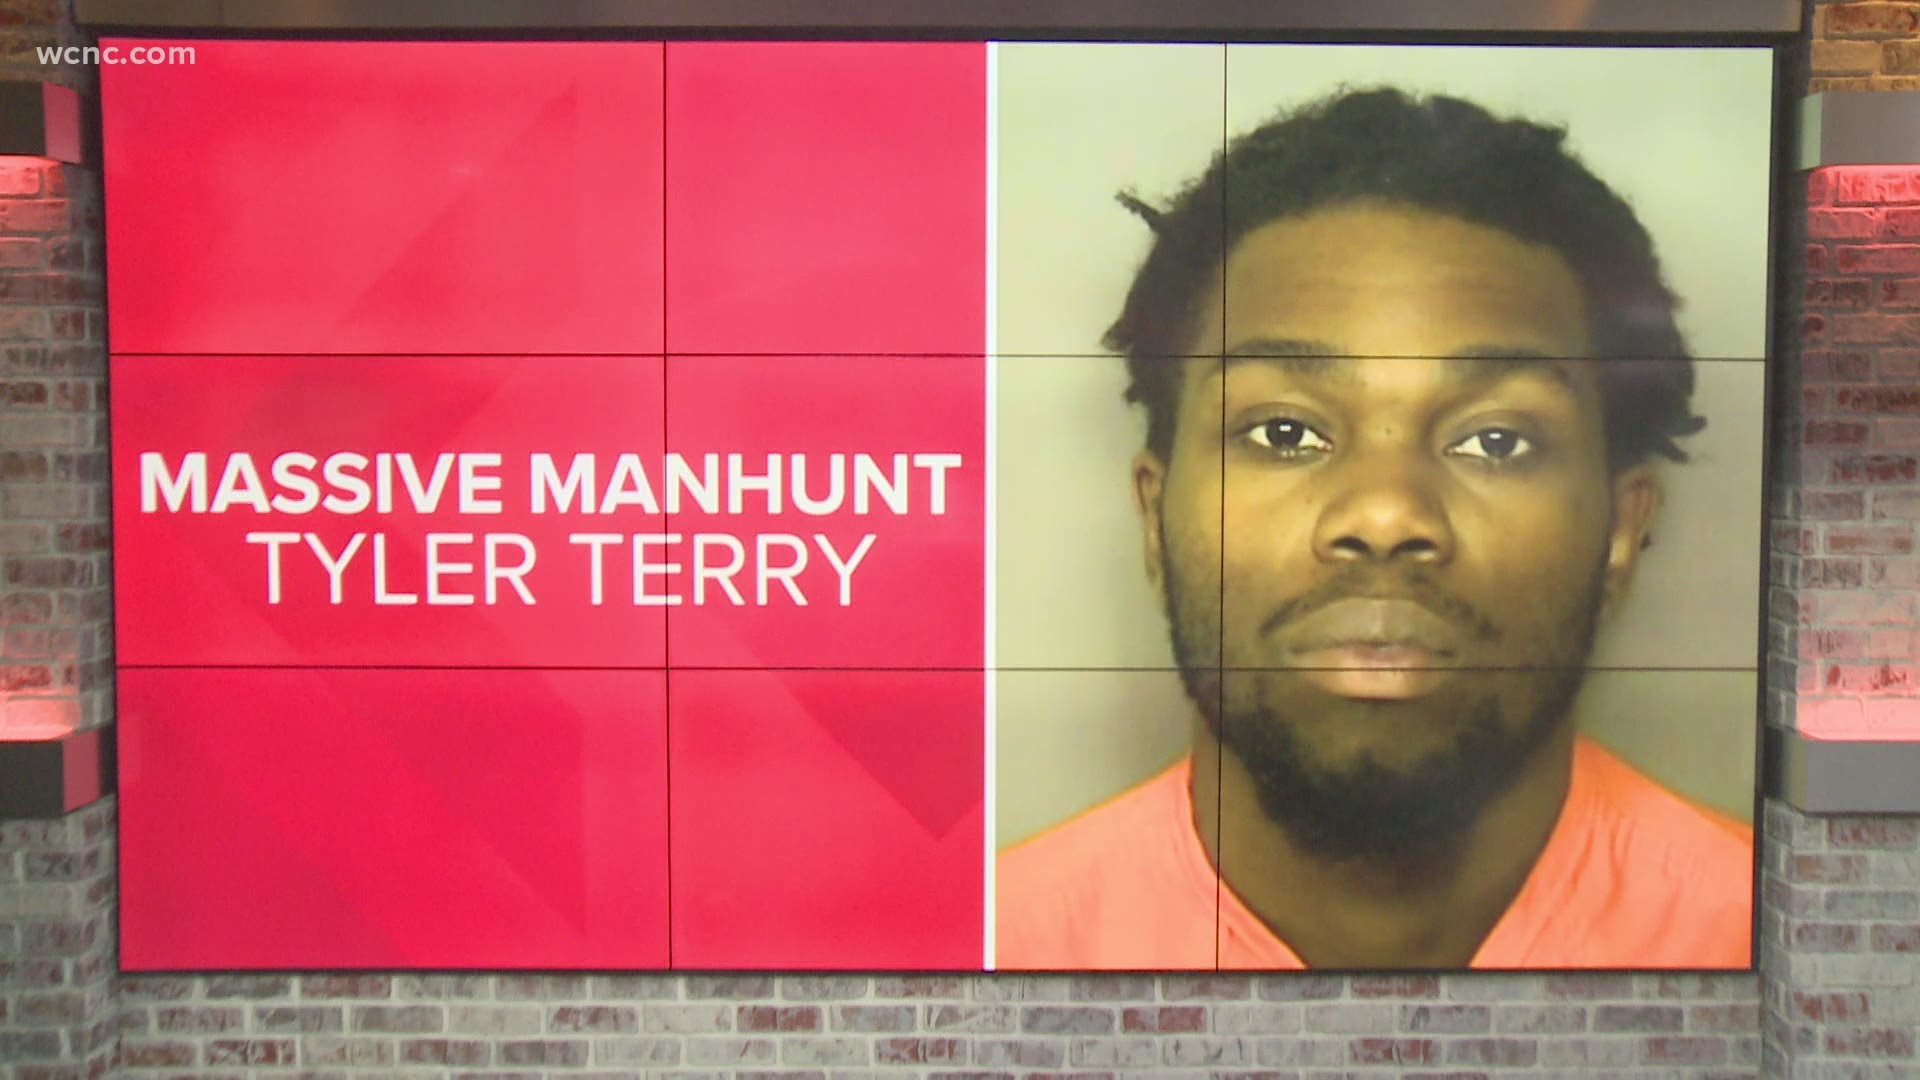 Tyler Terry, the man accused of murder and attempted murder in South Carolina and Missouri, remains on the run in Chester County as the manhunt continues.